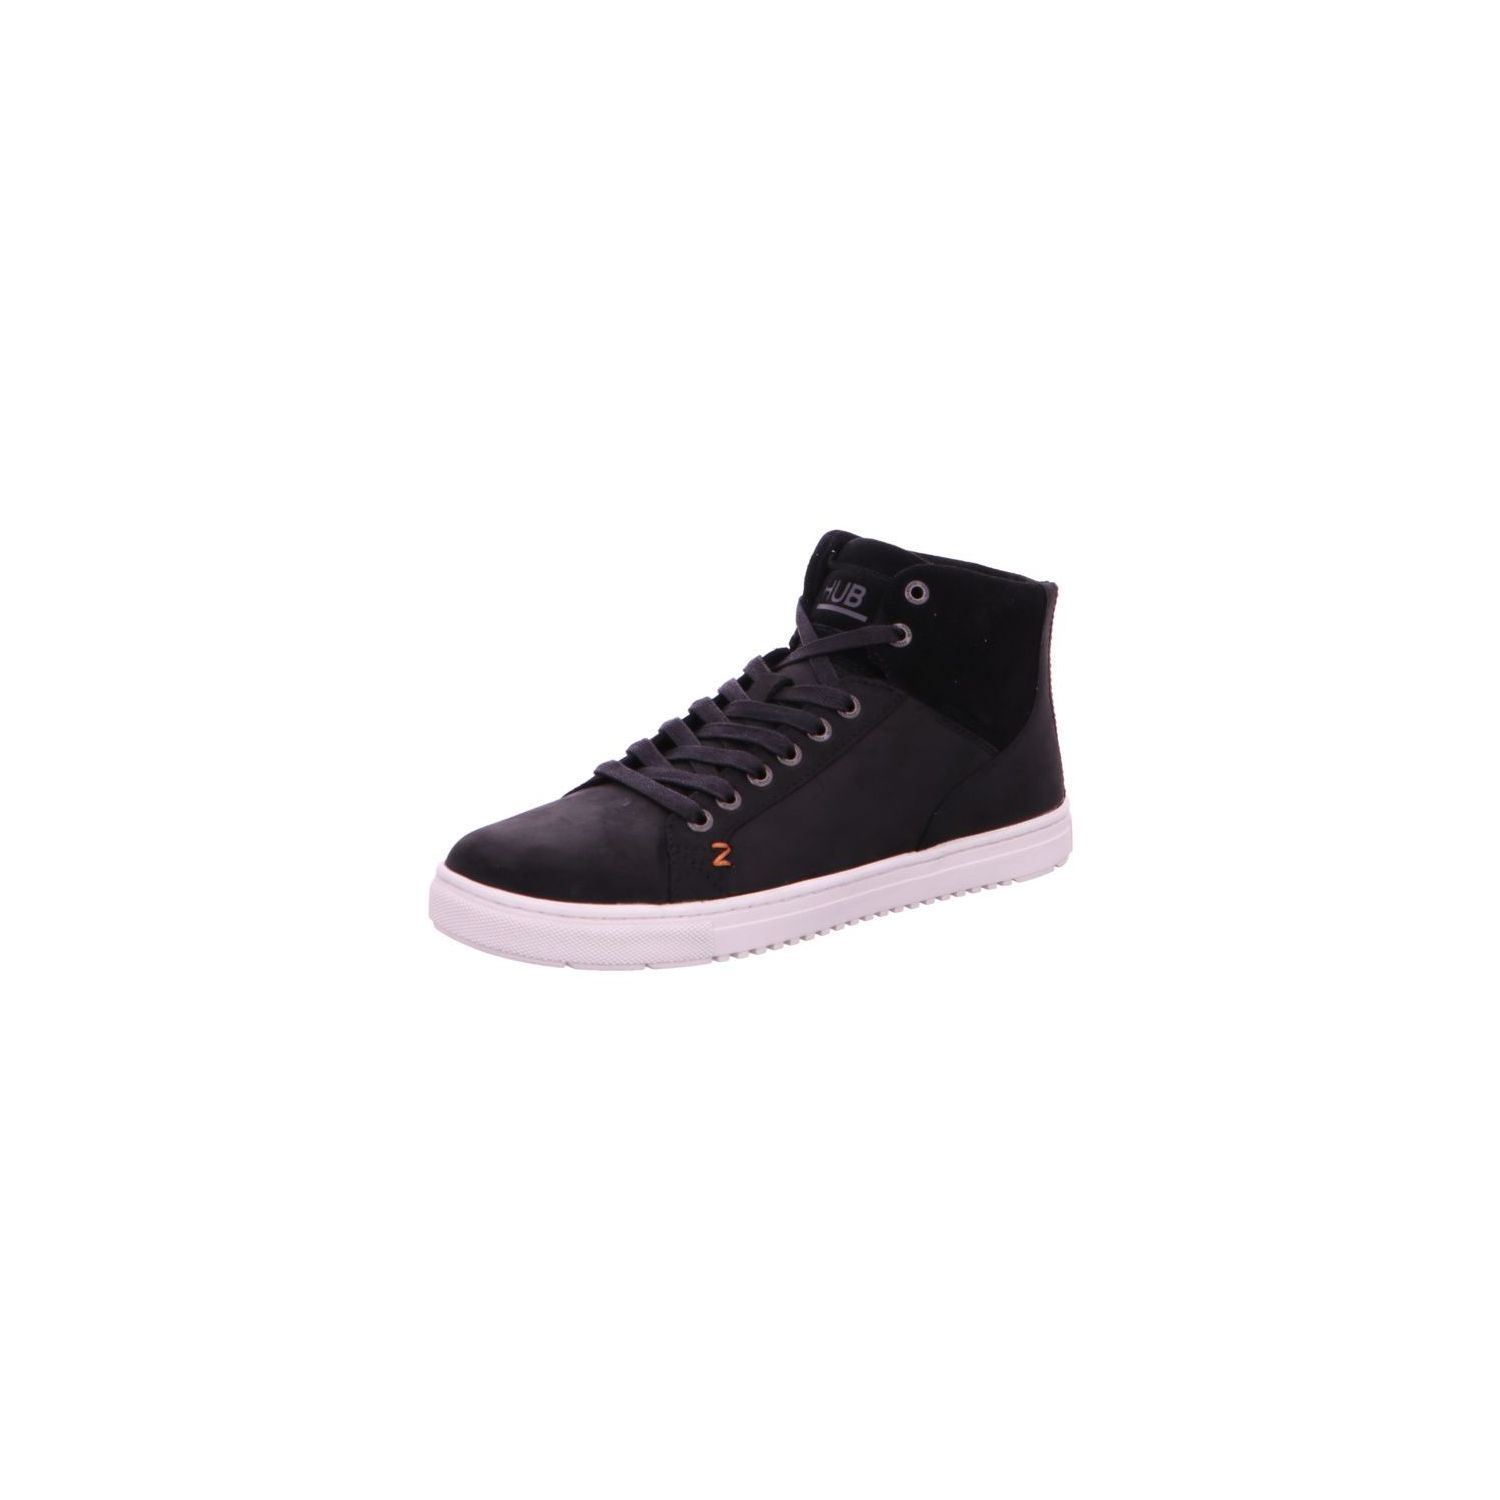 Hub Murrayfield Thumper Leather blk/off wht